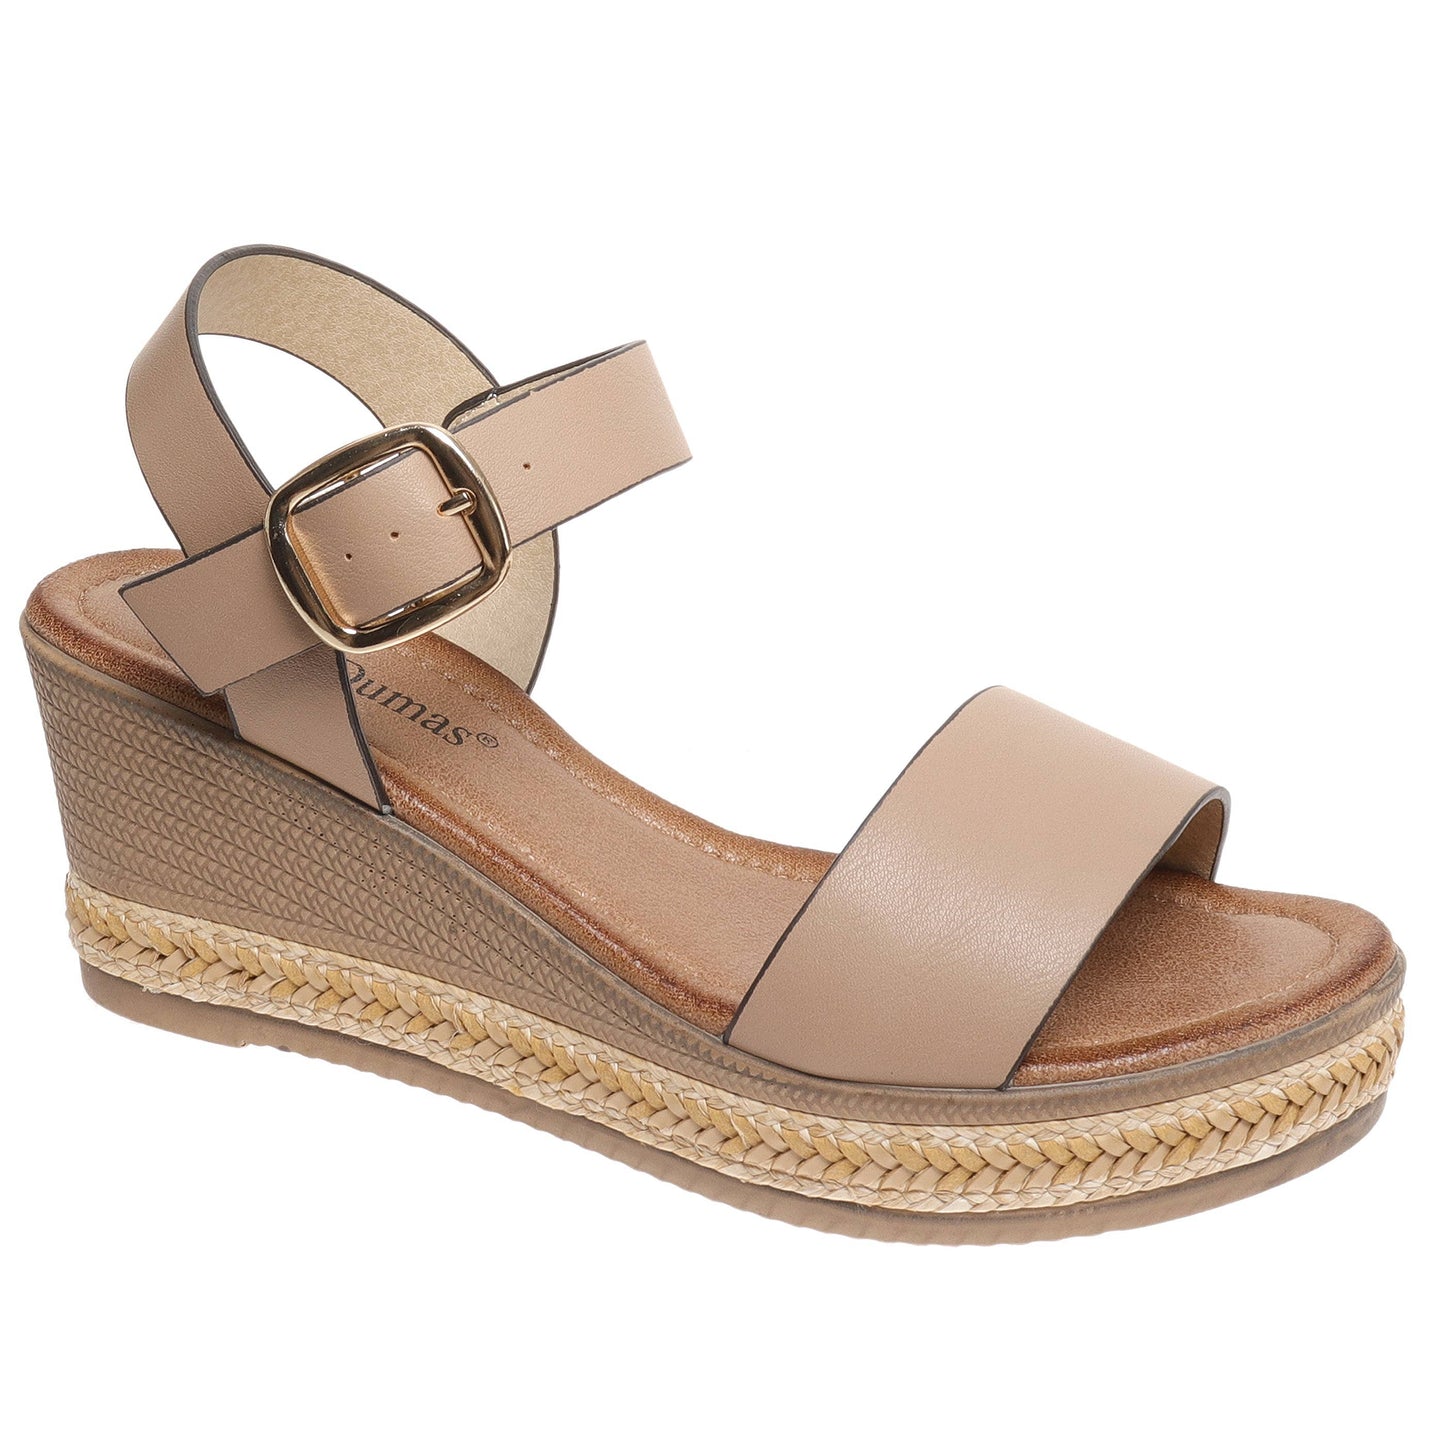 Edith Wedges in Nude